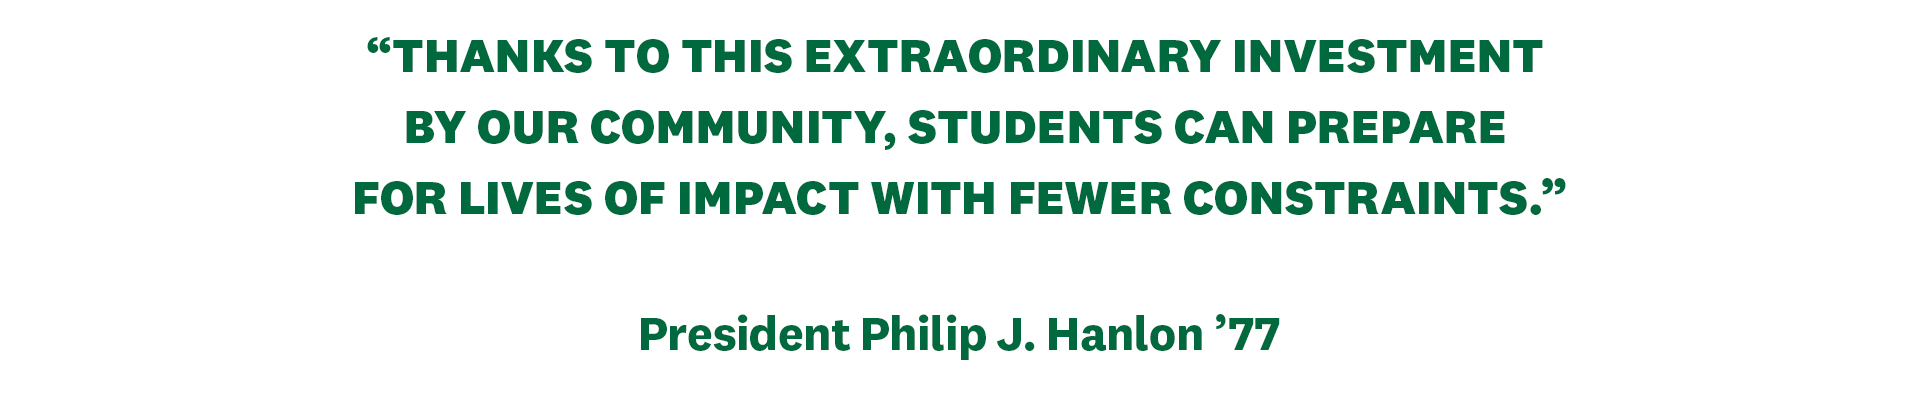 "Thanks to this extraordinary investment by our community, students can prepare for lives of impact with fewer constraints."” - President Philip J. Hanlon ’77